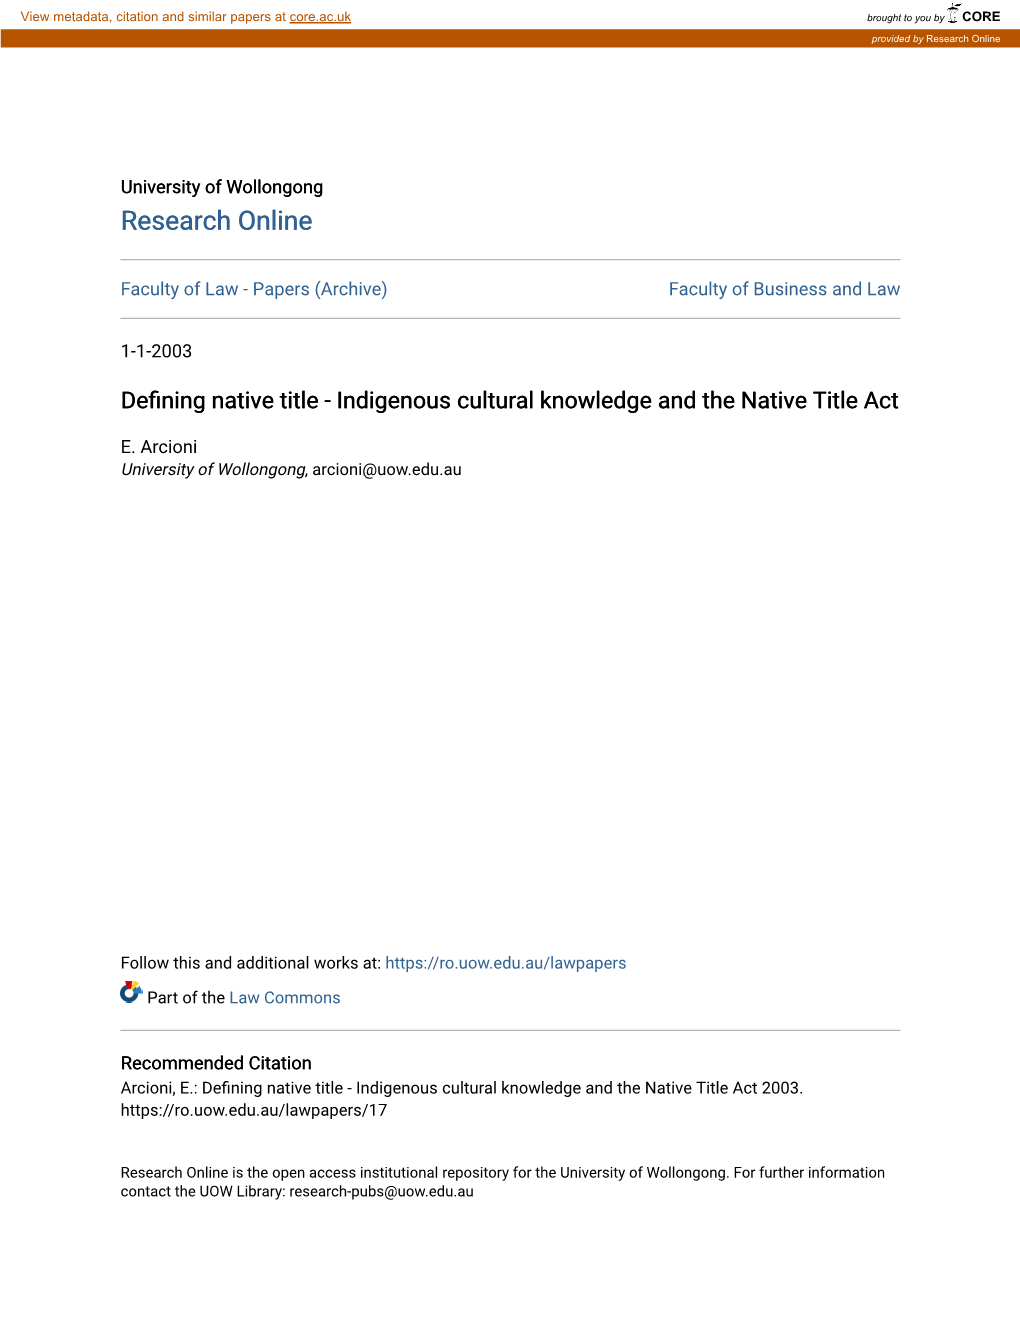 Indigenous Cultural Knowledge and the Native Title Act